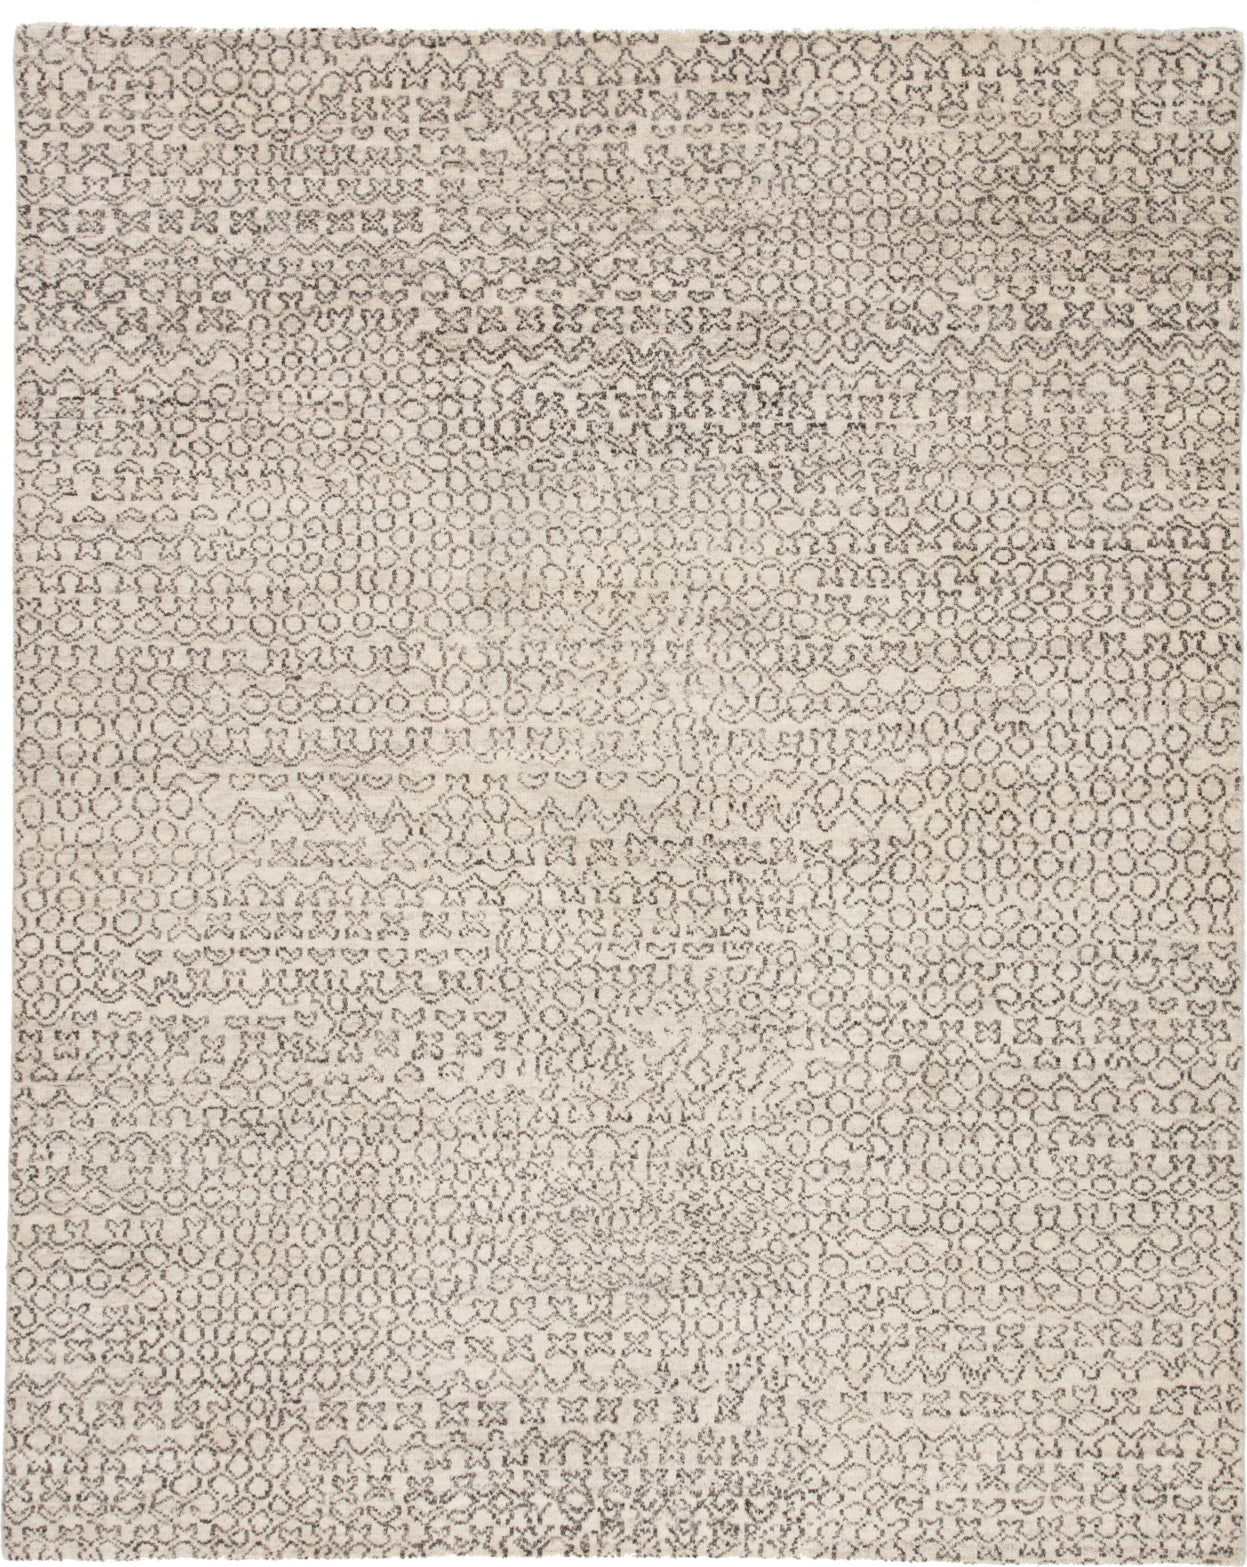 Jaipur Living Reverb REP02 Ivory/Black Area Rug by Pollack - Top Down